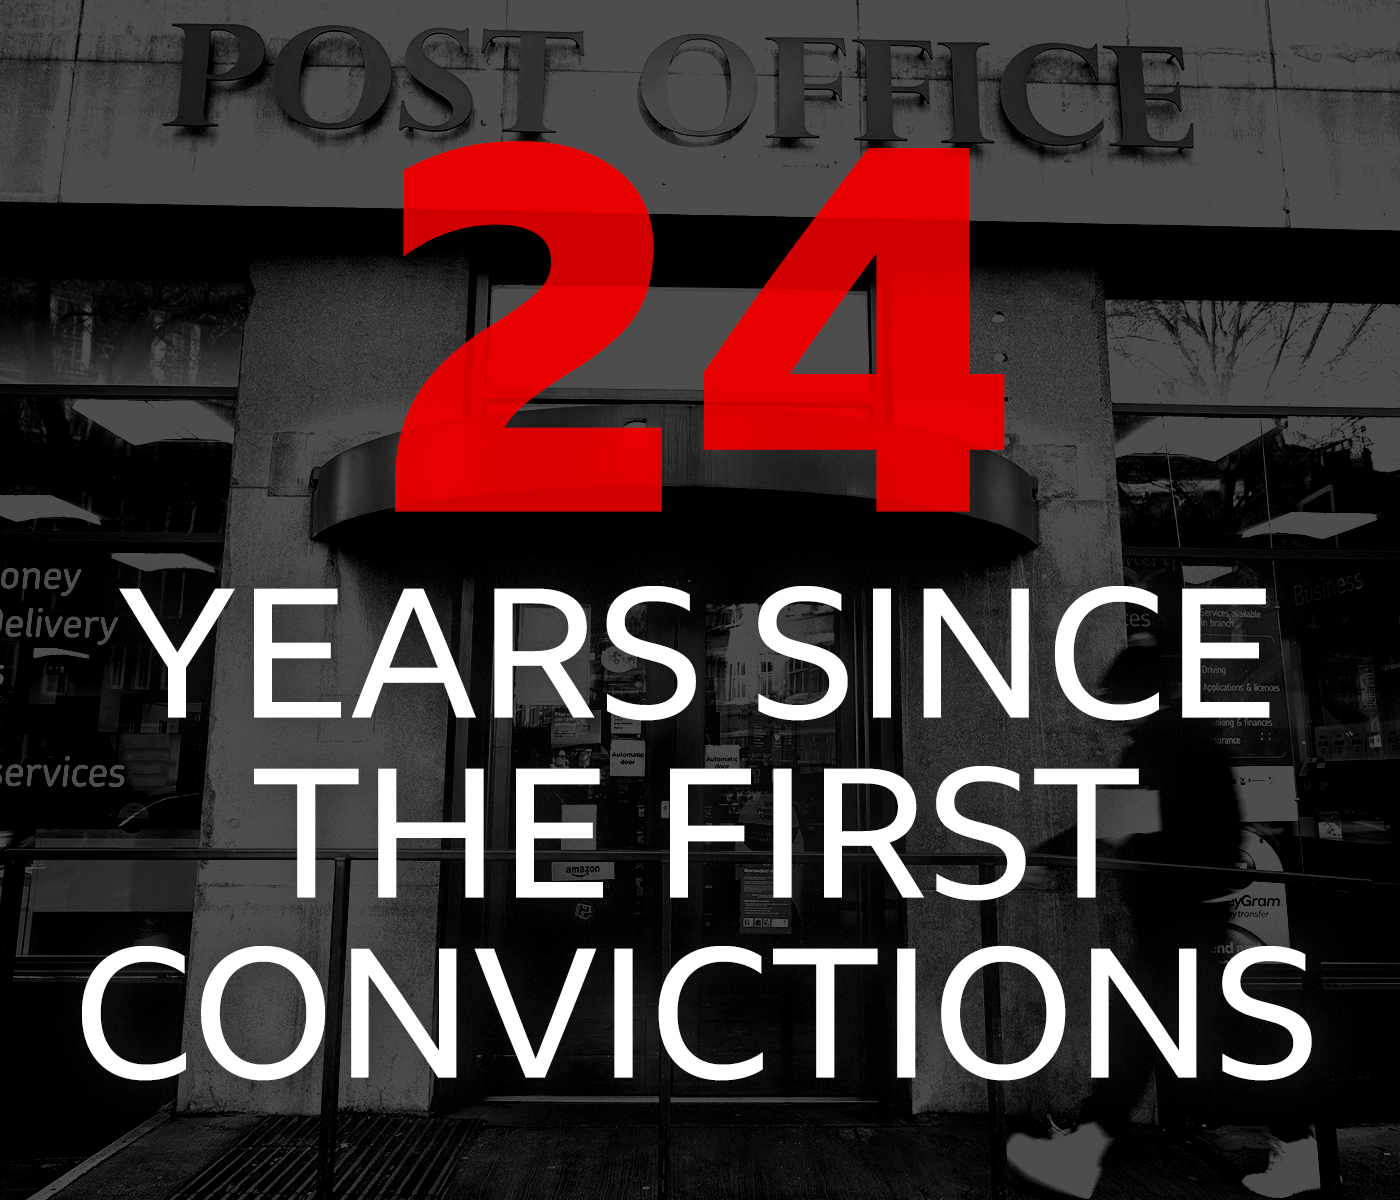 24 years since the first convictions